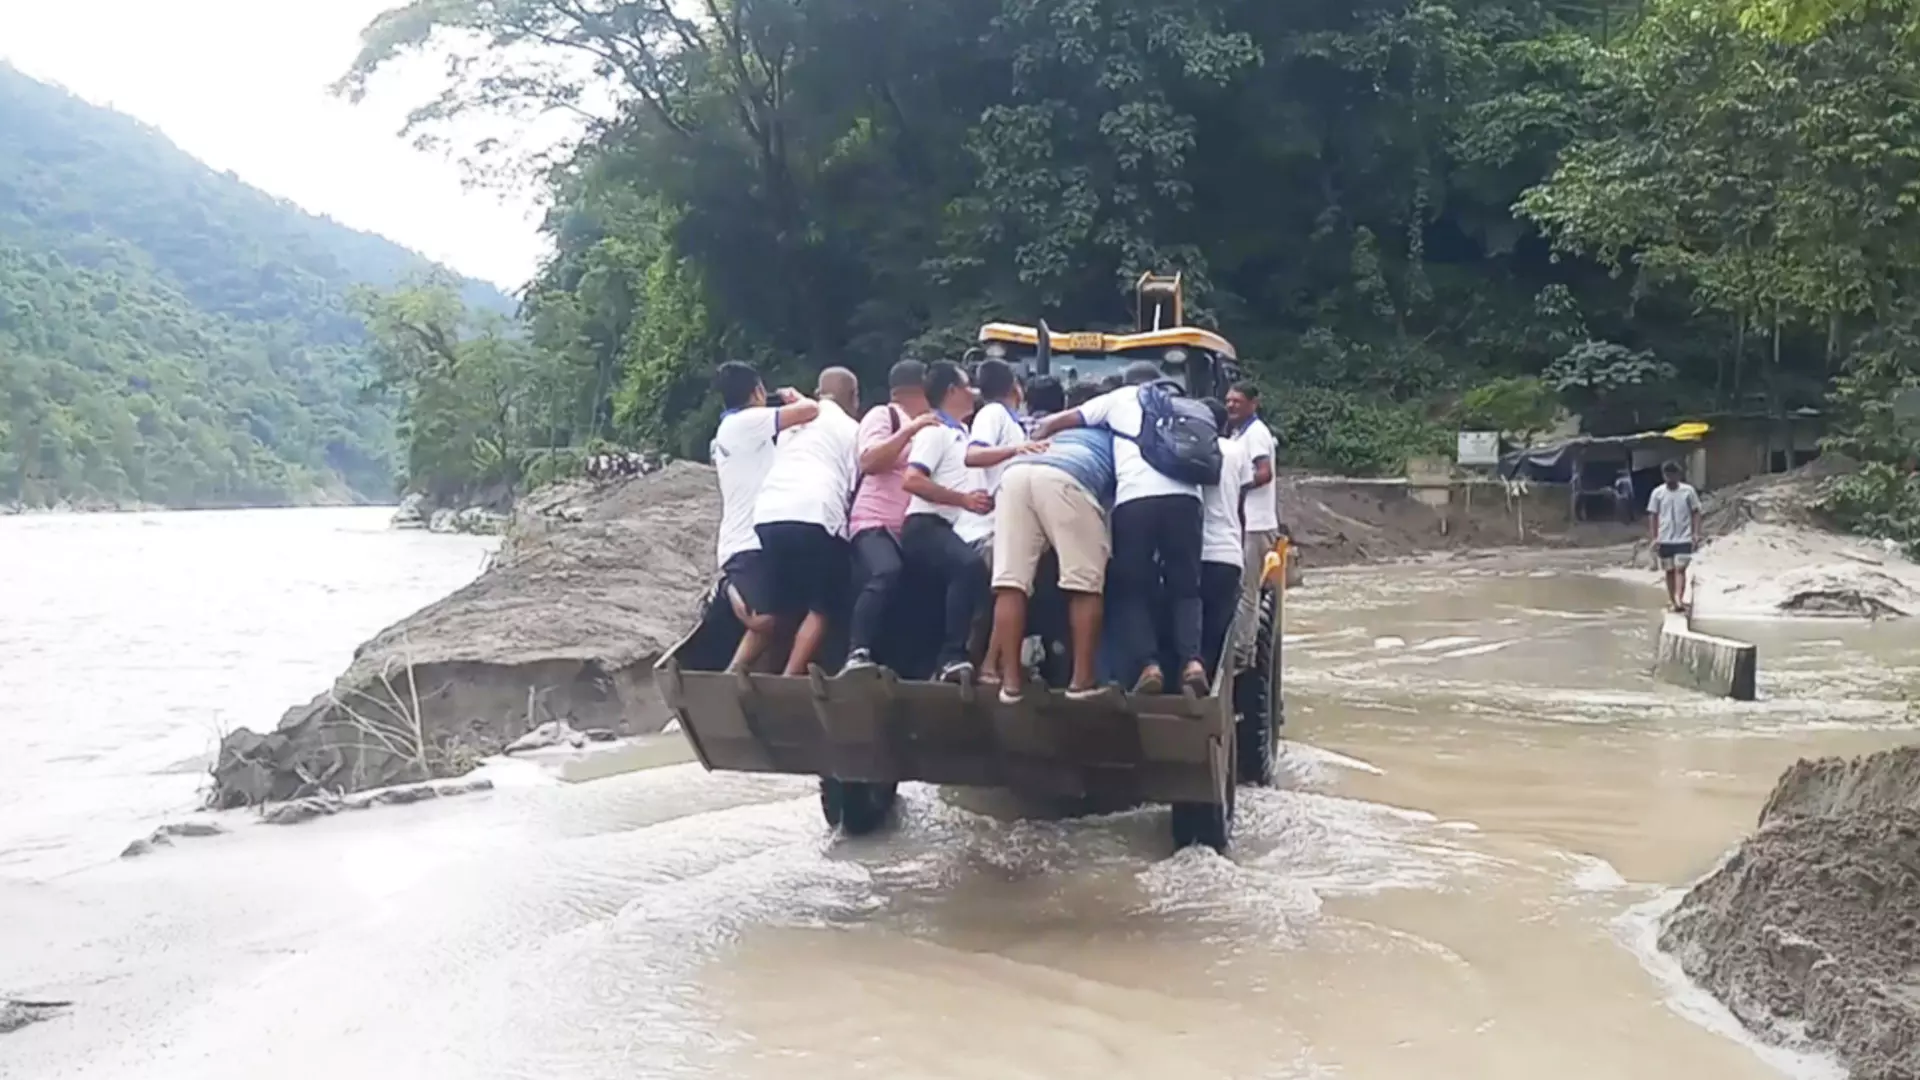 People try to escape a flooded area on a lorry in Kalimpong.